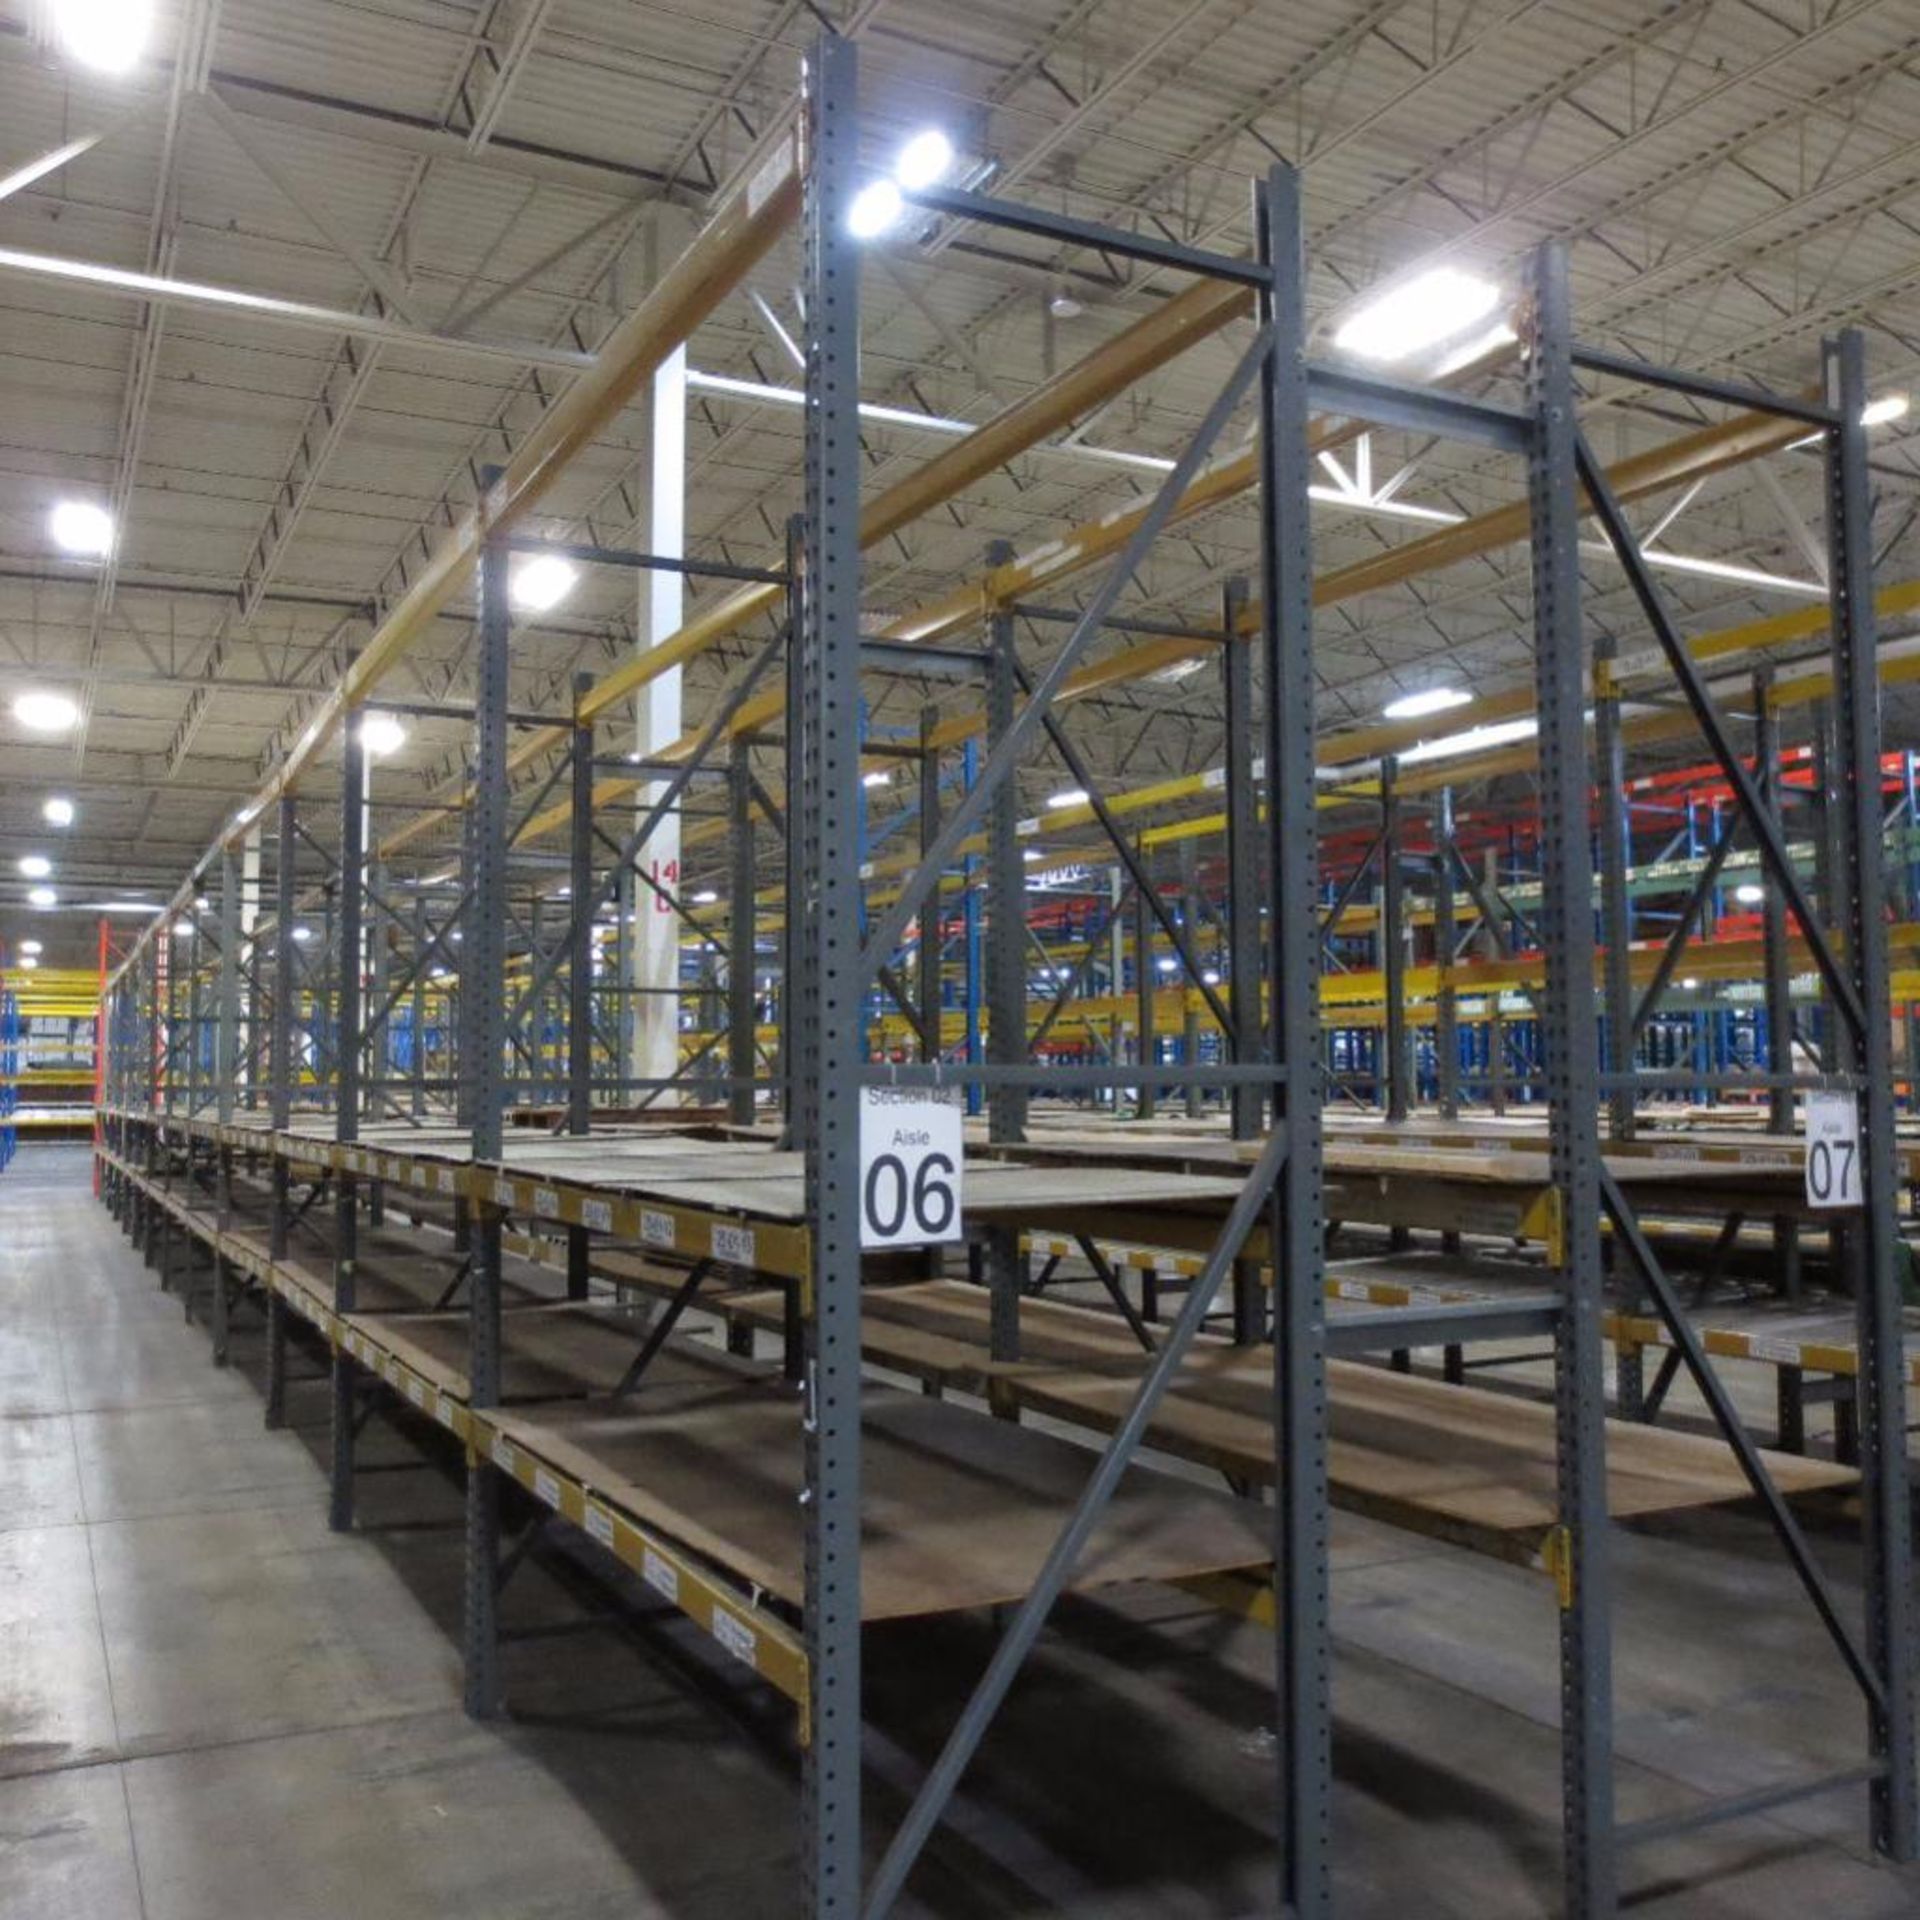 (26) Section of Pallet Racking, (26) Legs 12' X 42", Apx. 156 Cross Beams 8'